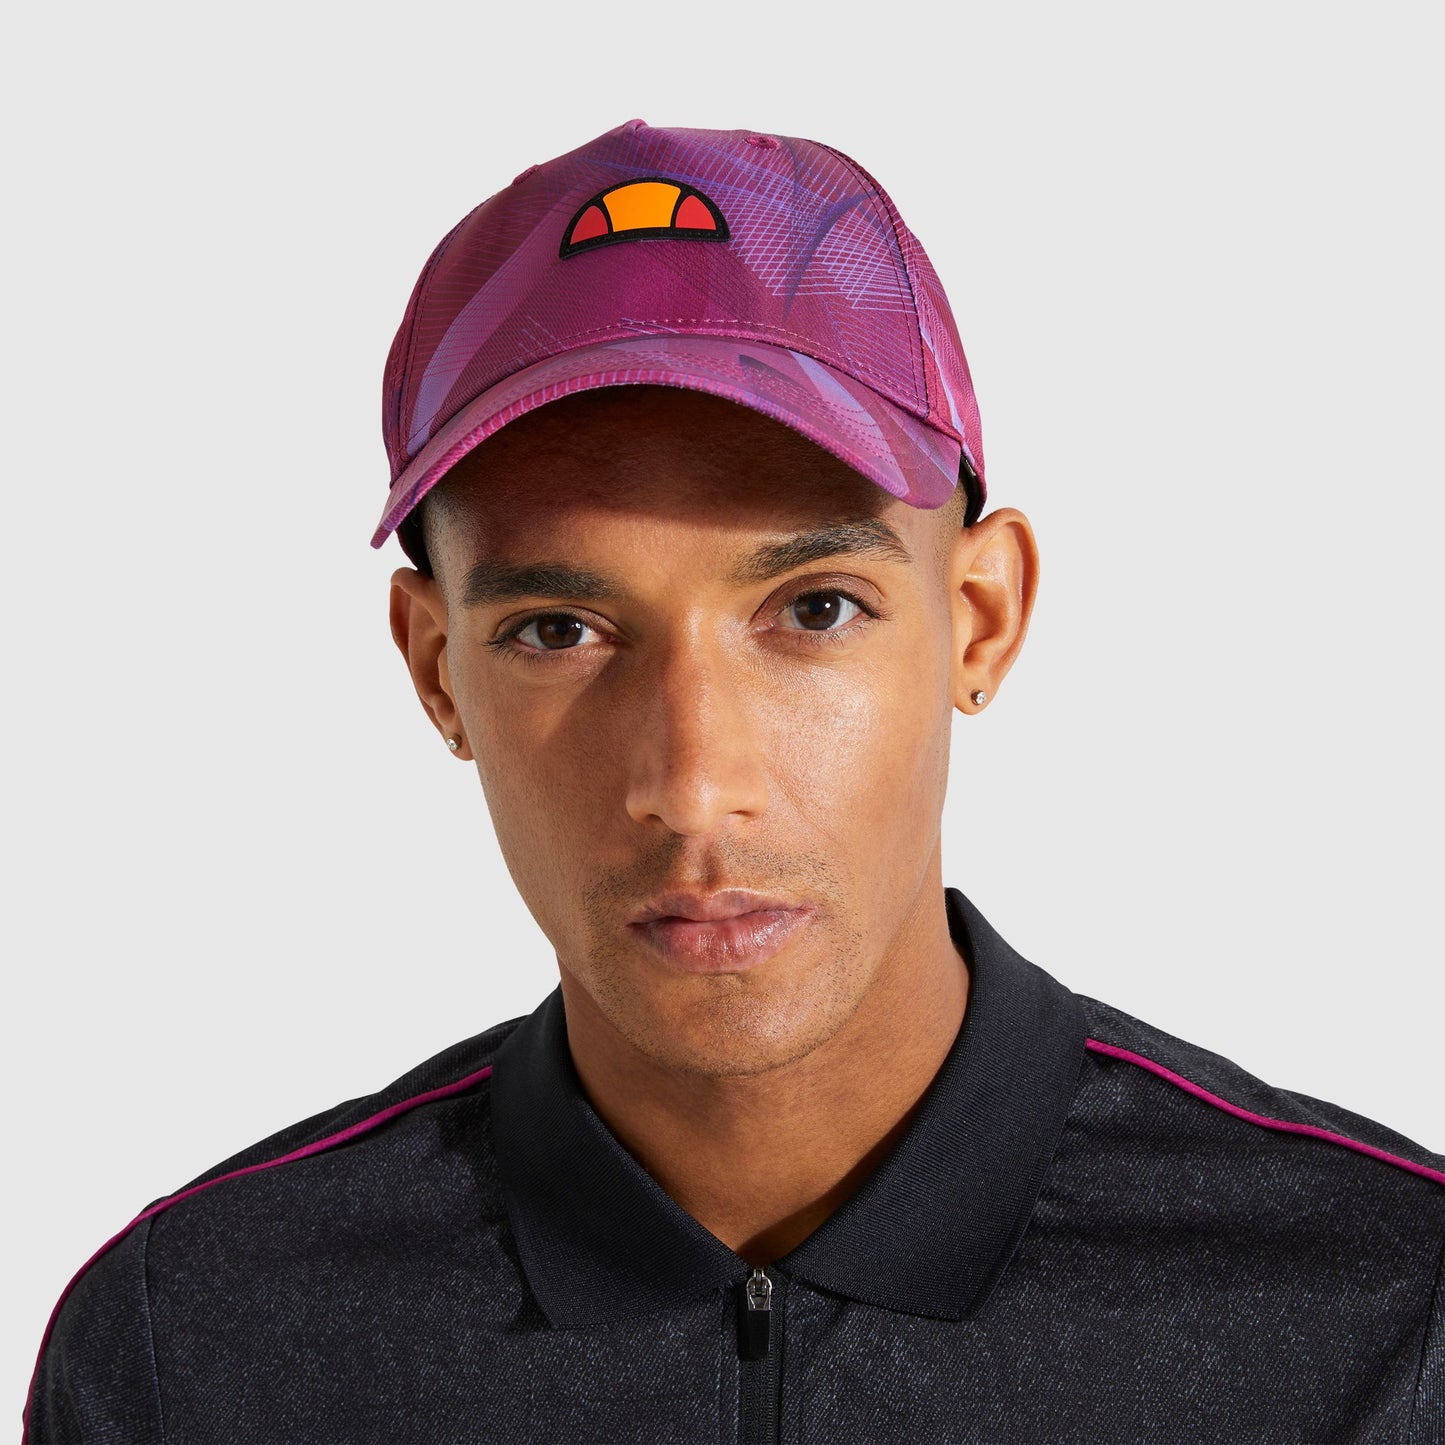 Caps and Clothing by Ellesse, Italian Brand